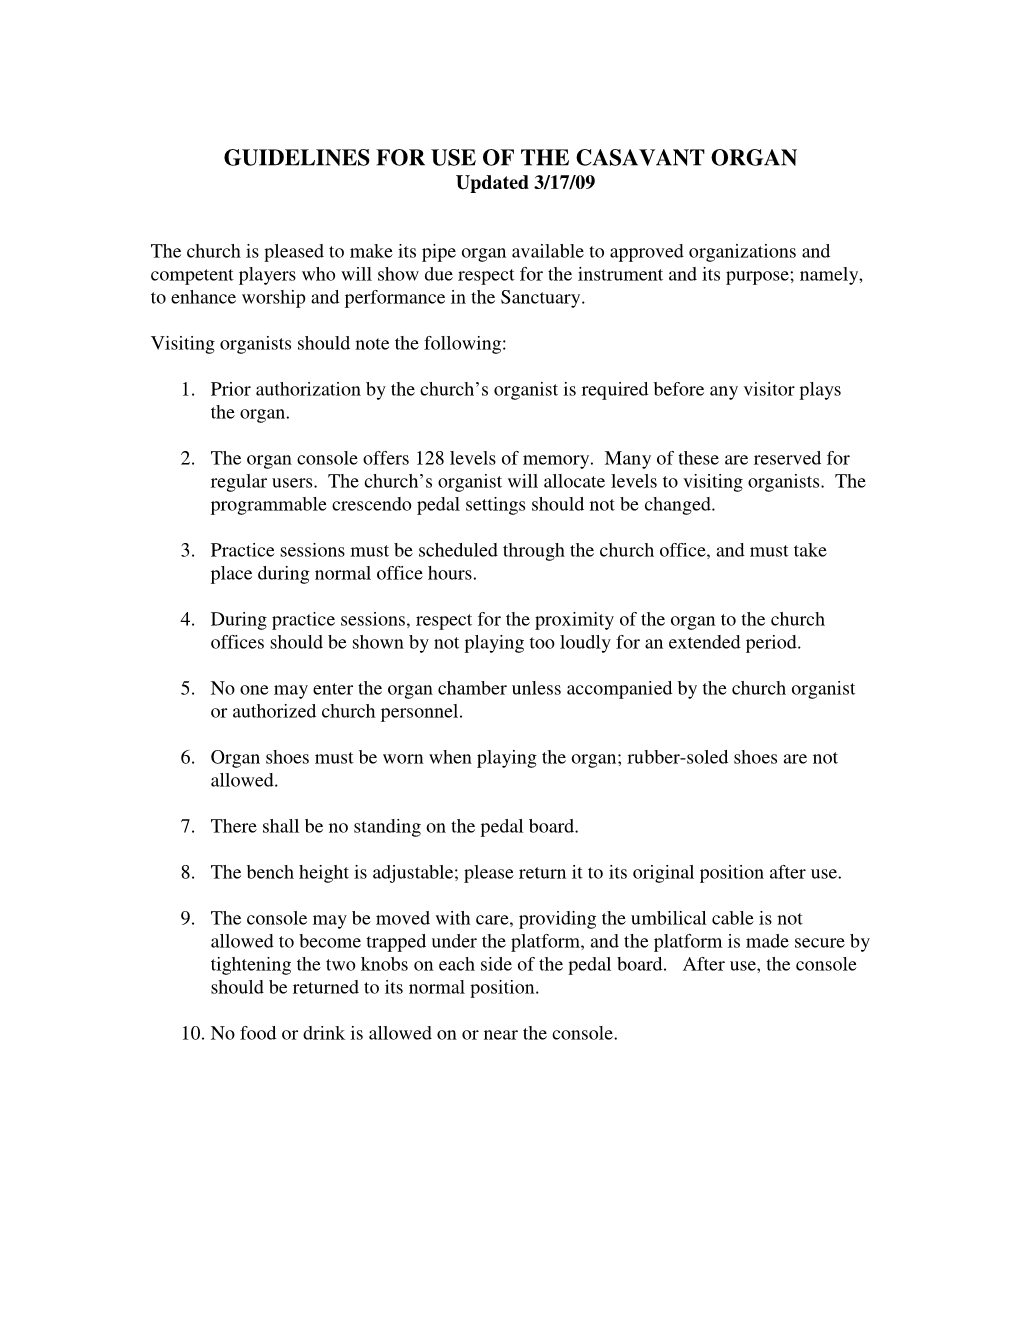 GUIDELINES for USE of the CASAVANT ORGAN Updated 3/17/09